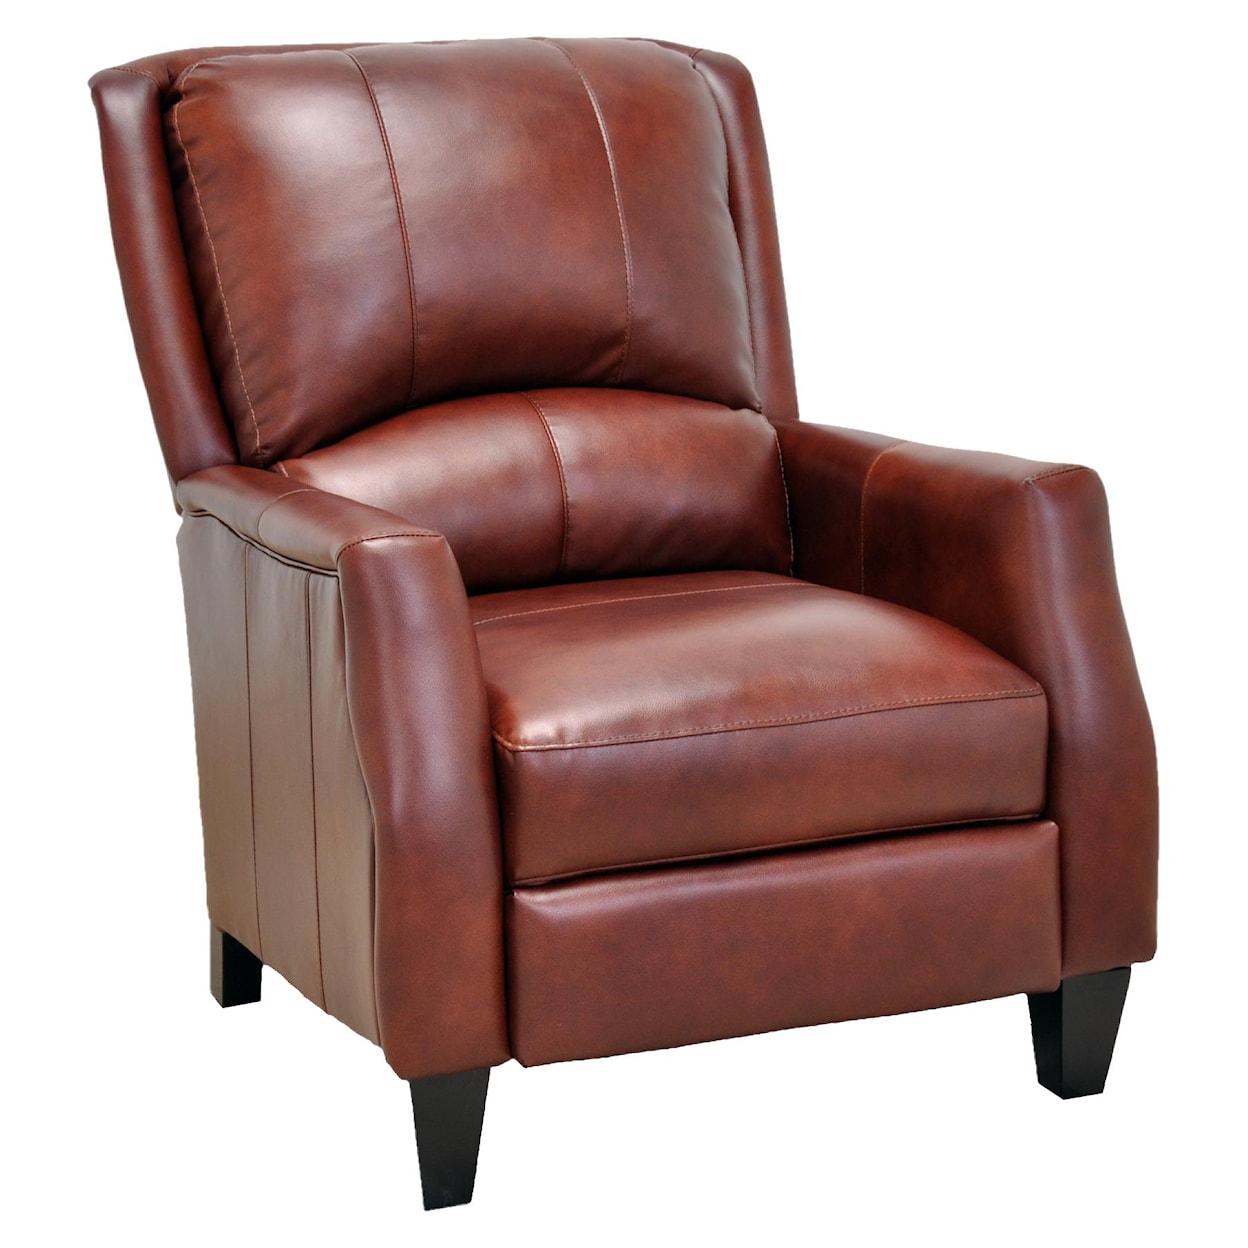 Franklin Franklin Recliners Cosmo Push Back Recliner